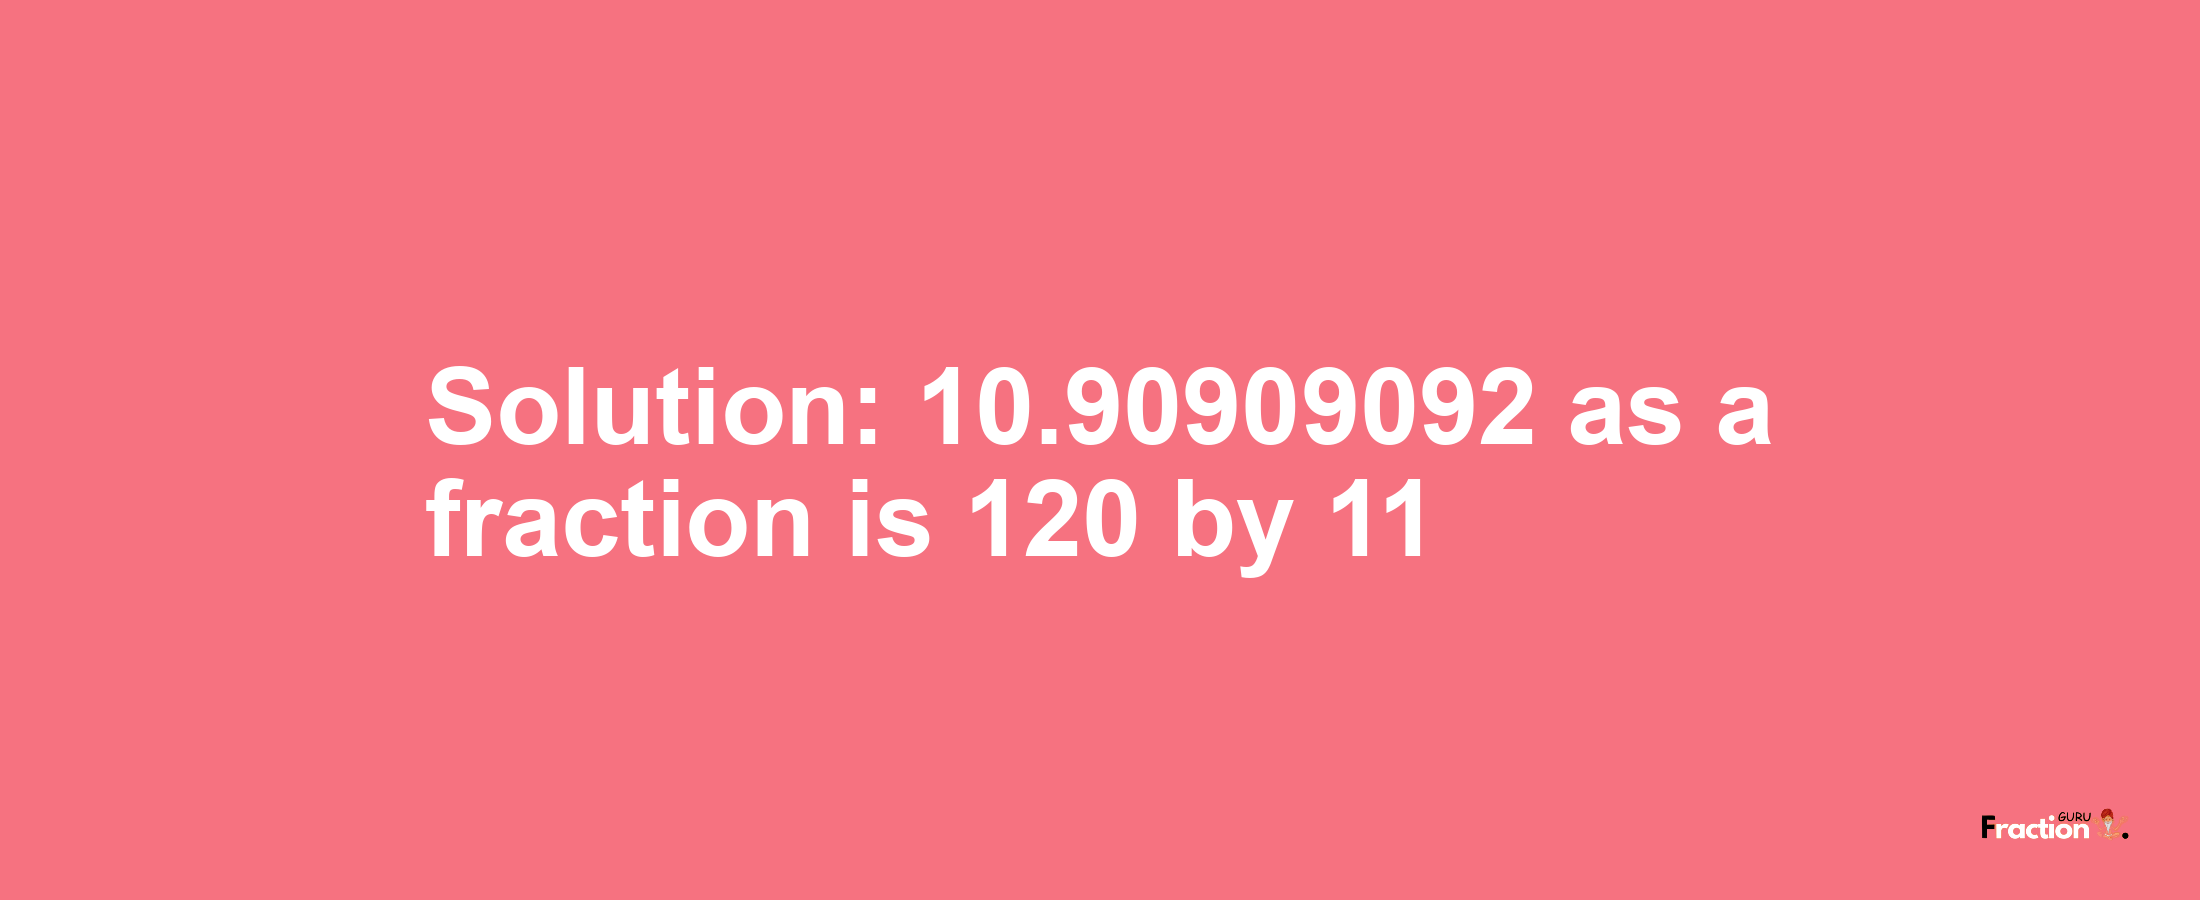 Solution:10.90909092 as a fraction is 120/11